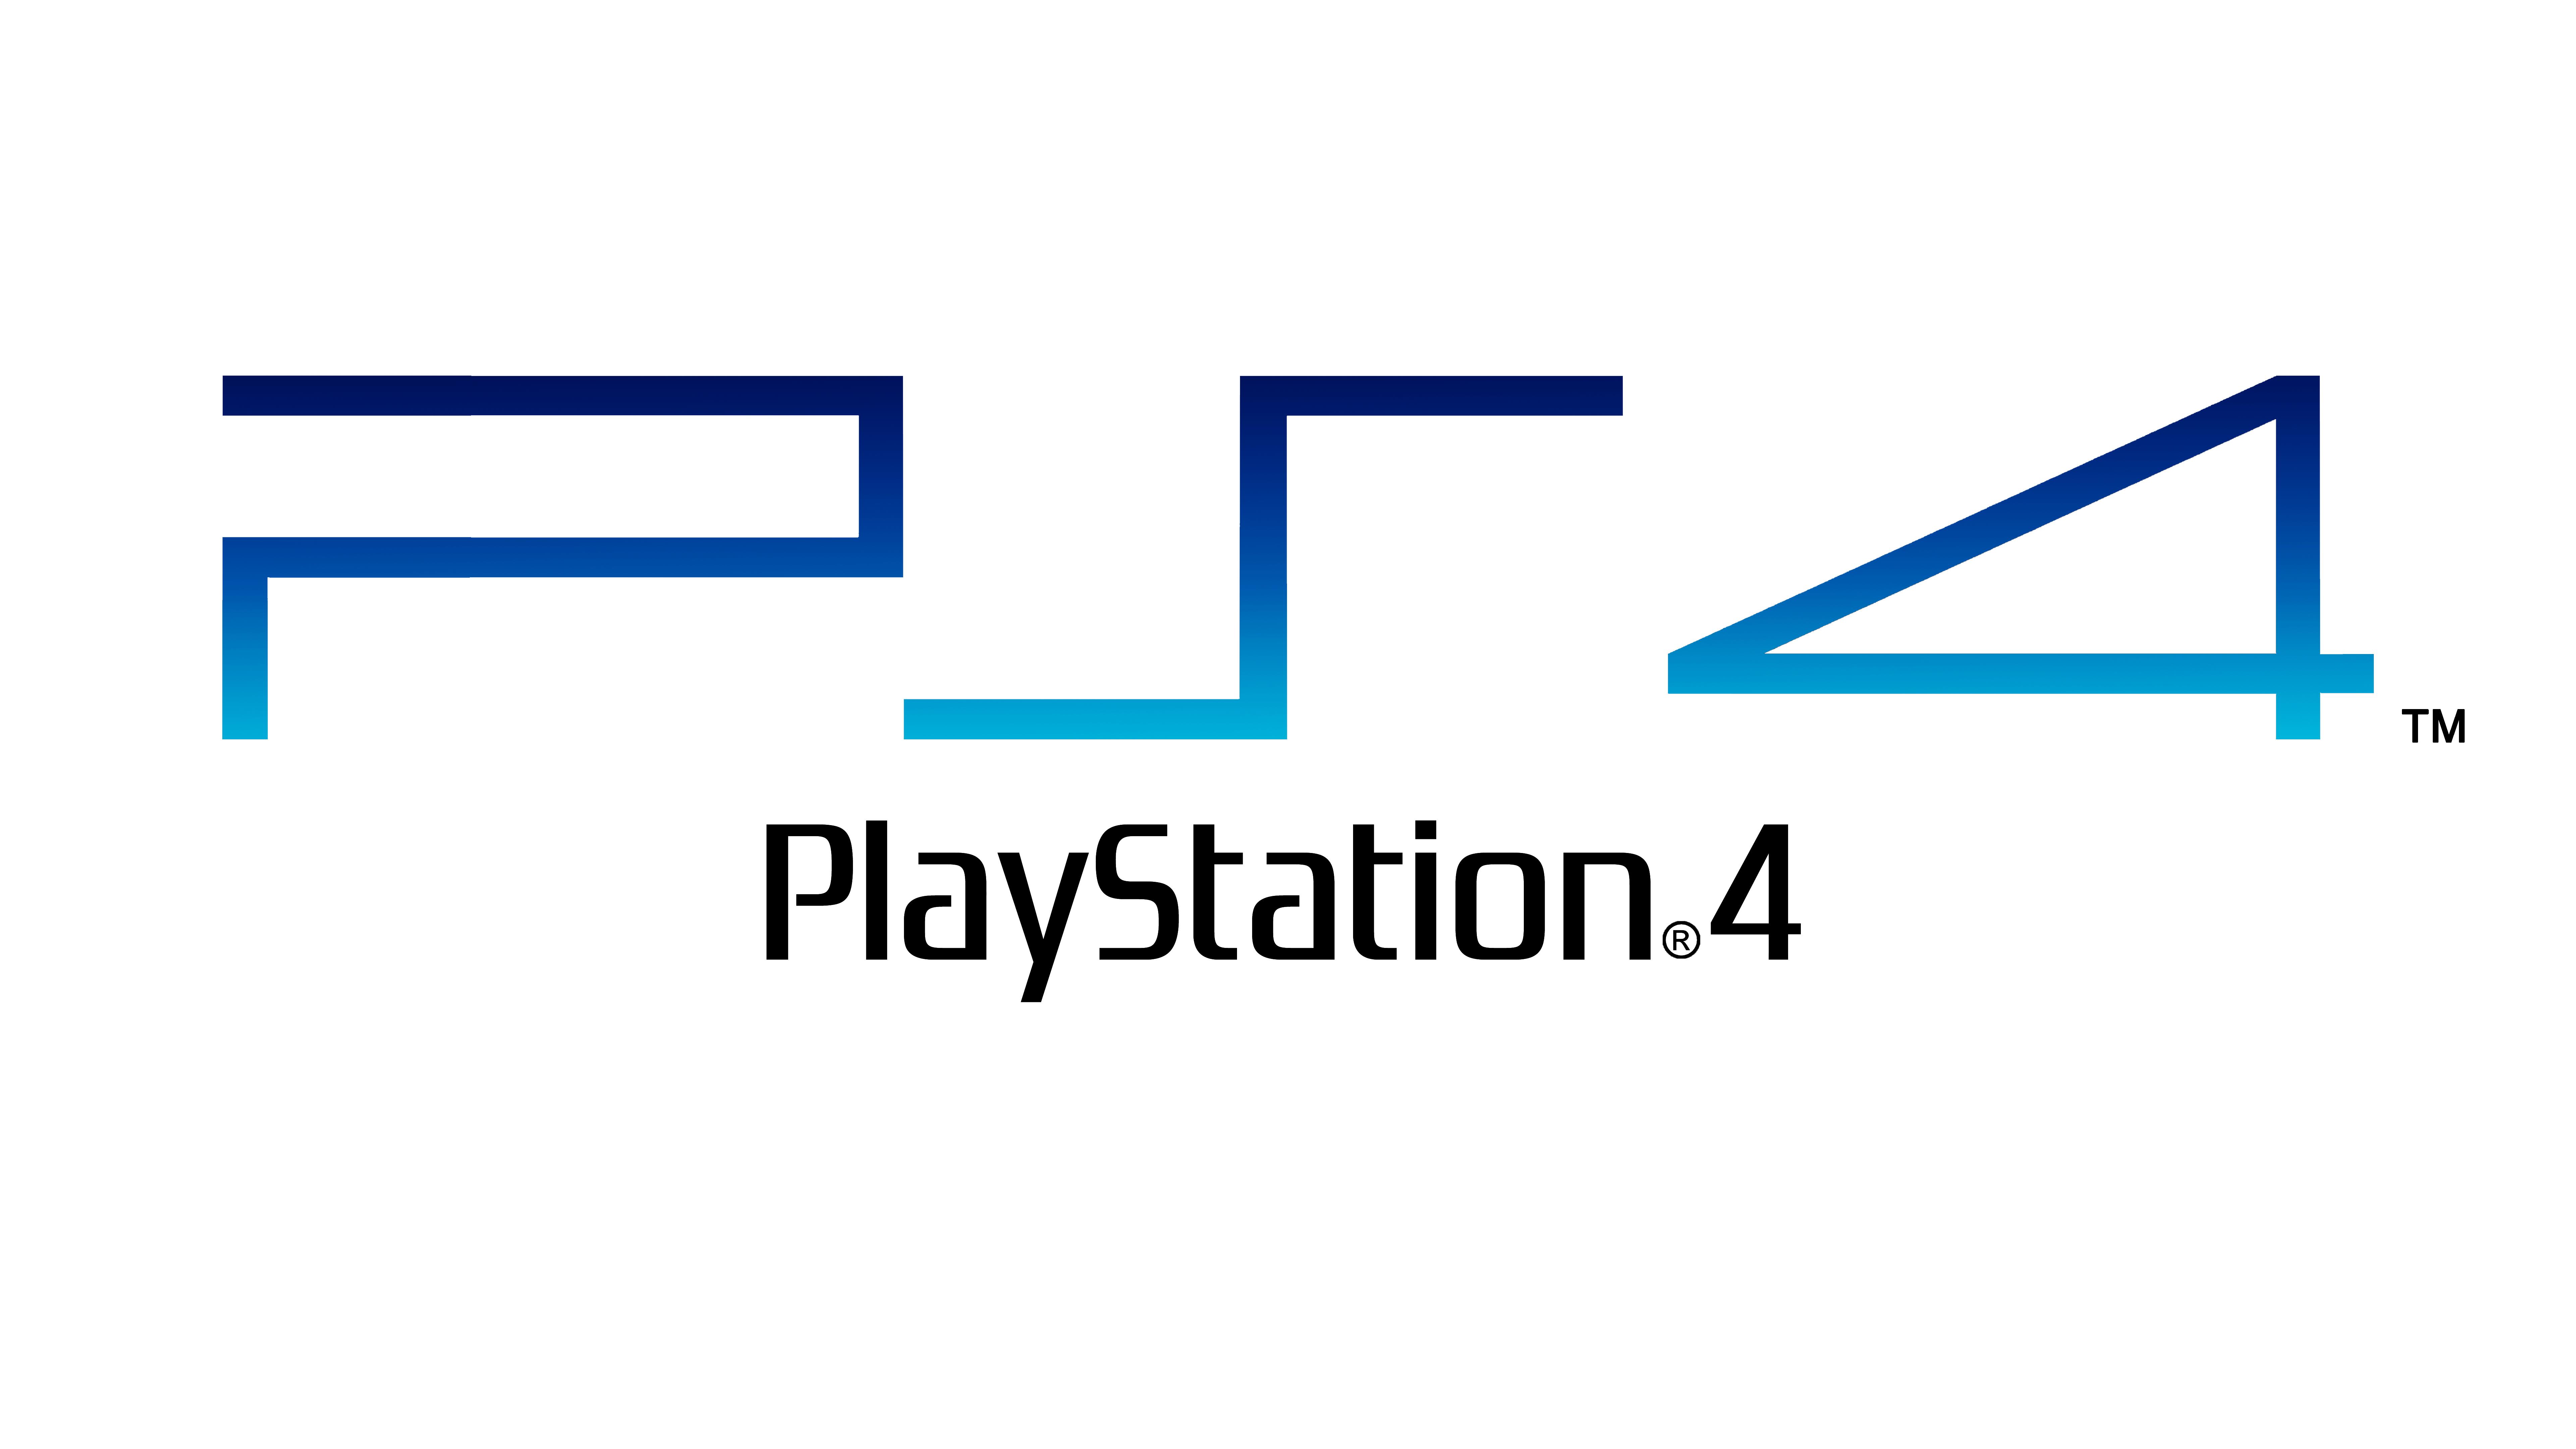 PS4 Logo - PS2-like PS4 Logo (re-post from r/playstation) : PS4